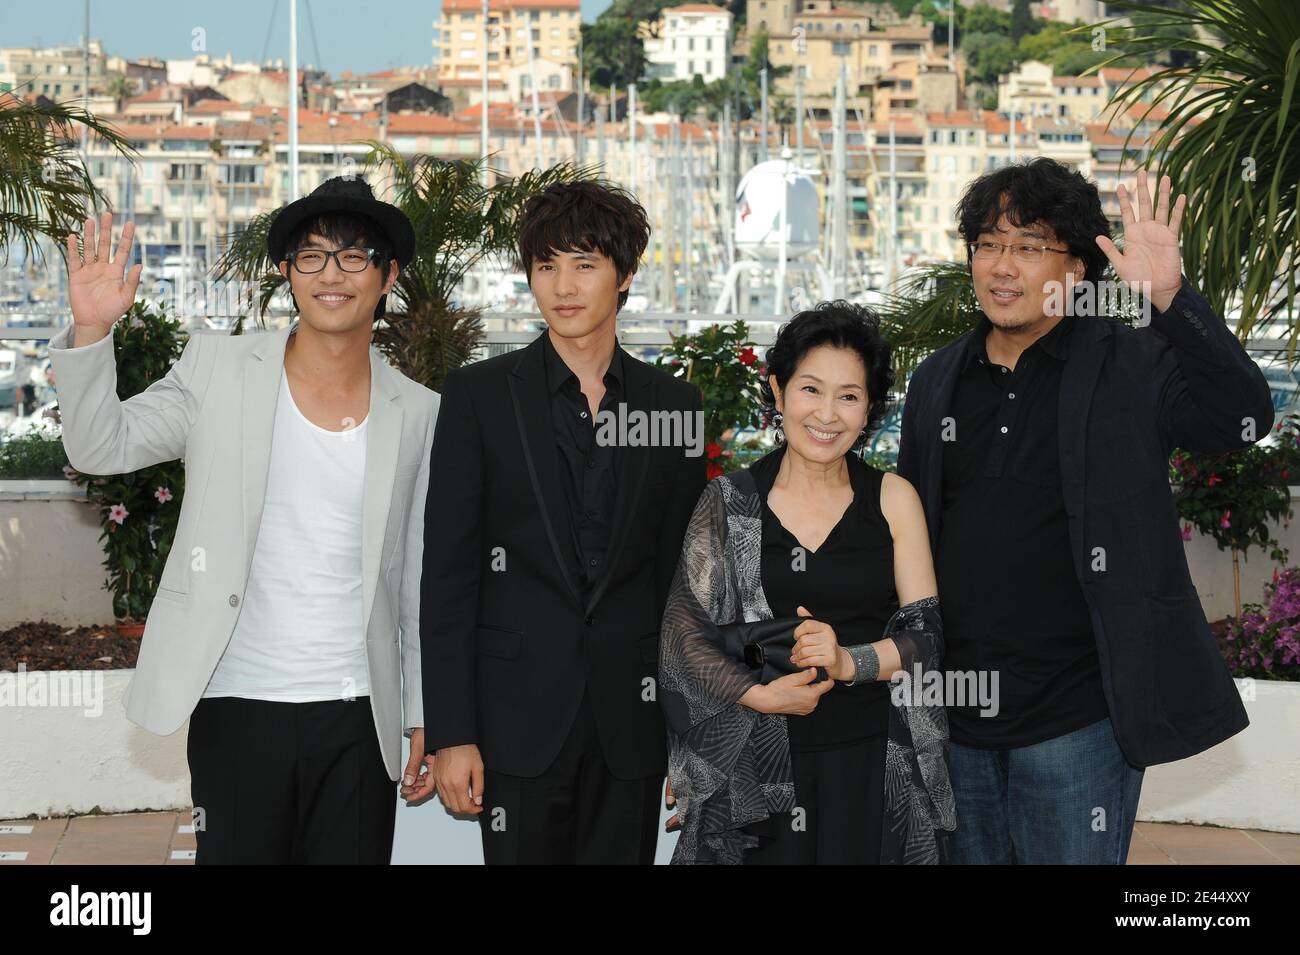 Actors Jin Goo and Won Bin, Actress Kim Hye-Ja and director Bong Joon Ho attend the 'Mother' Photocall held at the Palais Des Festival during the 62nd International Cannes Film Festival in Cannes, France on May 16, 2009. Photo by Nebinger-Orban/ABACAPRESS.COM Stock Photo